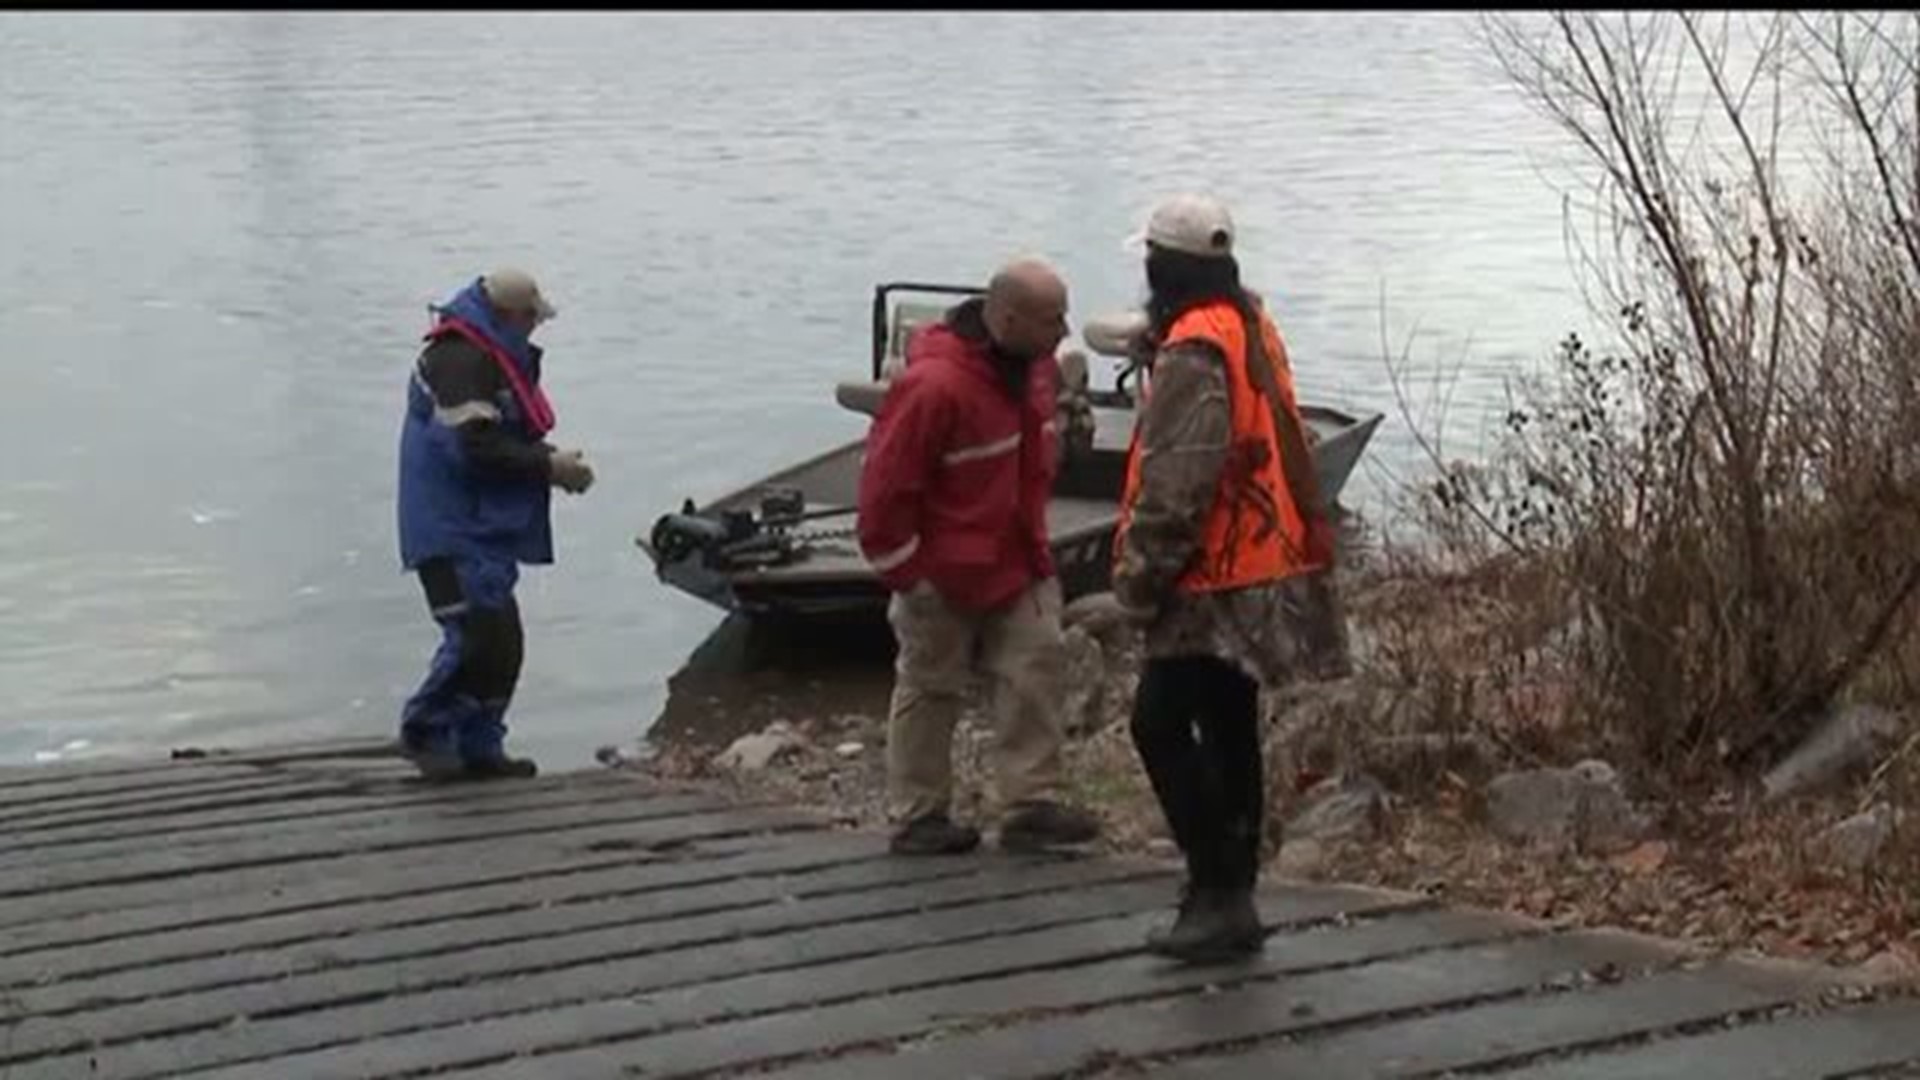 Search continues for missing teen hunter along Susquehanna River